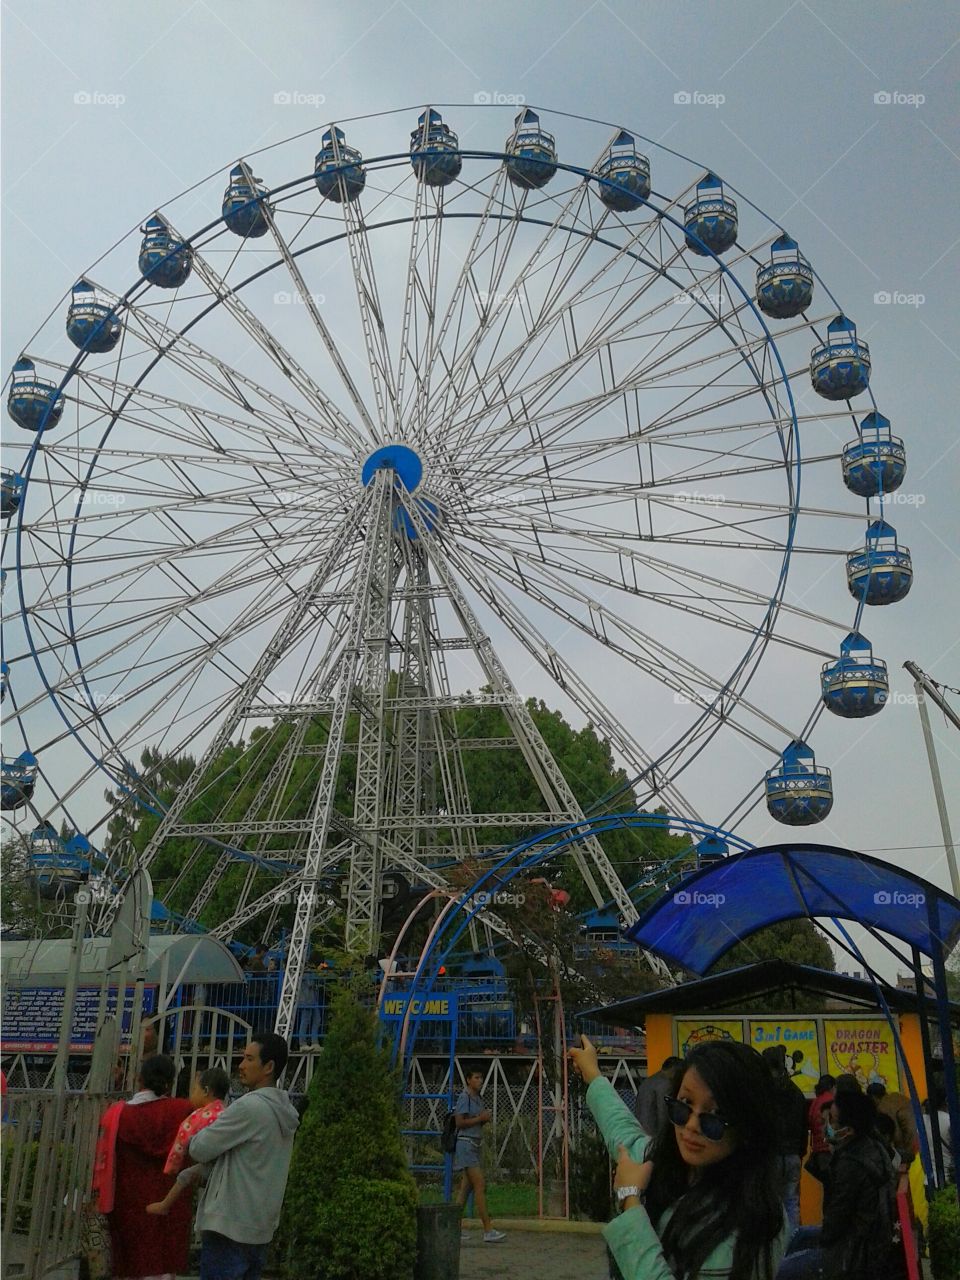 From the funpark.
Enjoy ahead with family and friends.Located in bhrikutimandap,kathmandu,nepal.